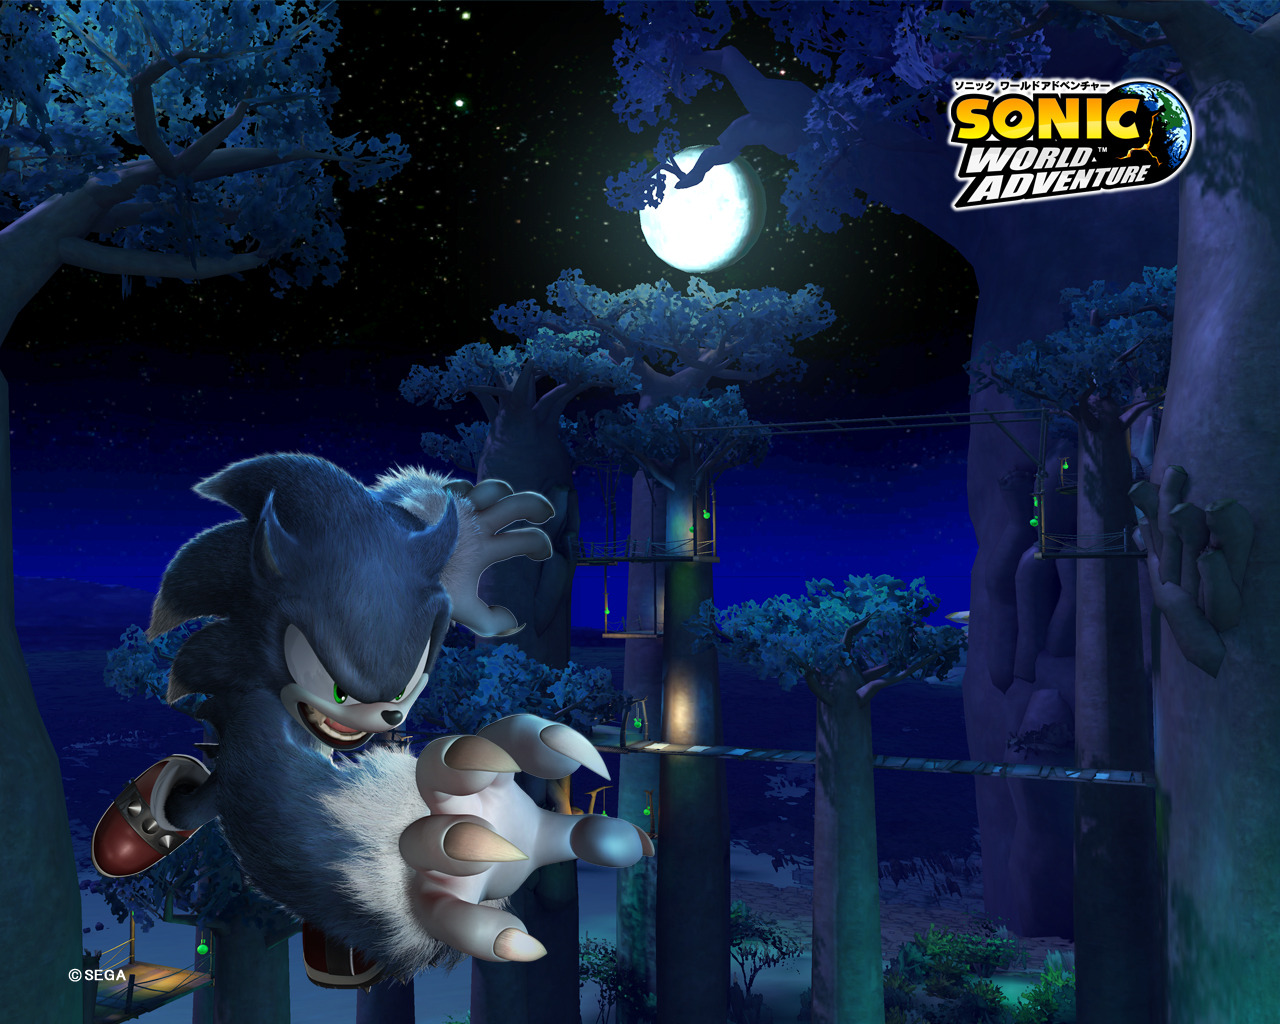 Sonic Unleashed, released as Sonic World Adventure in Japan in 2008